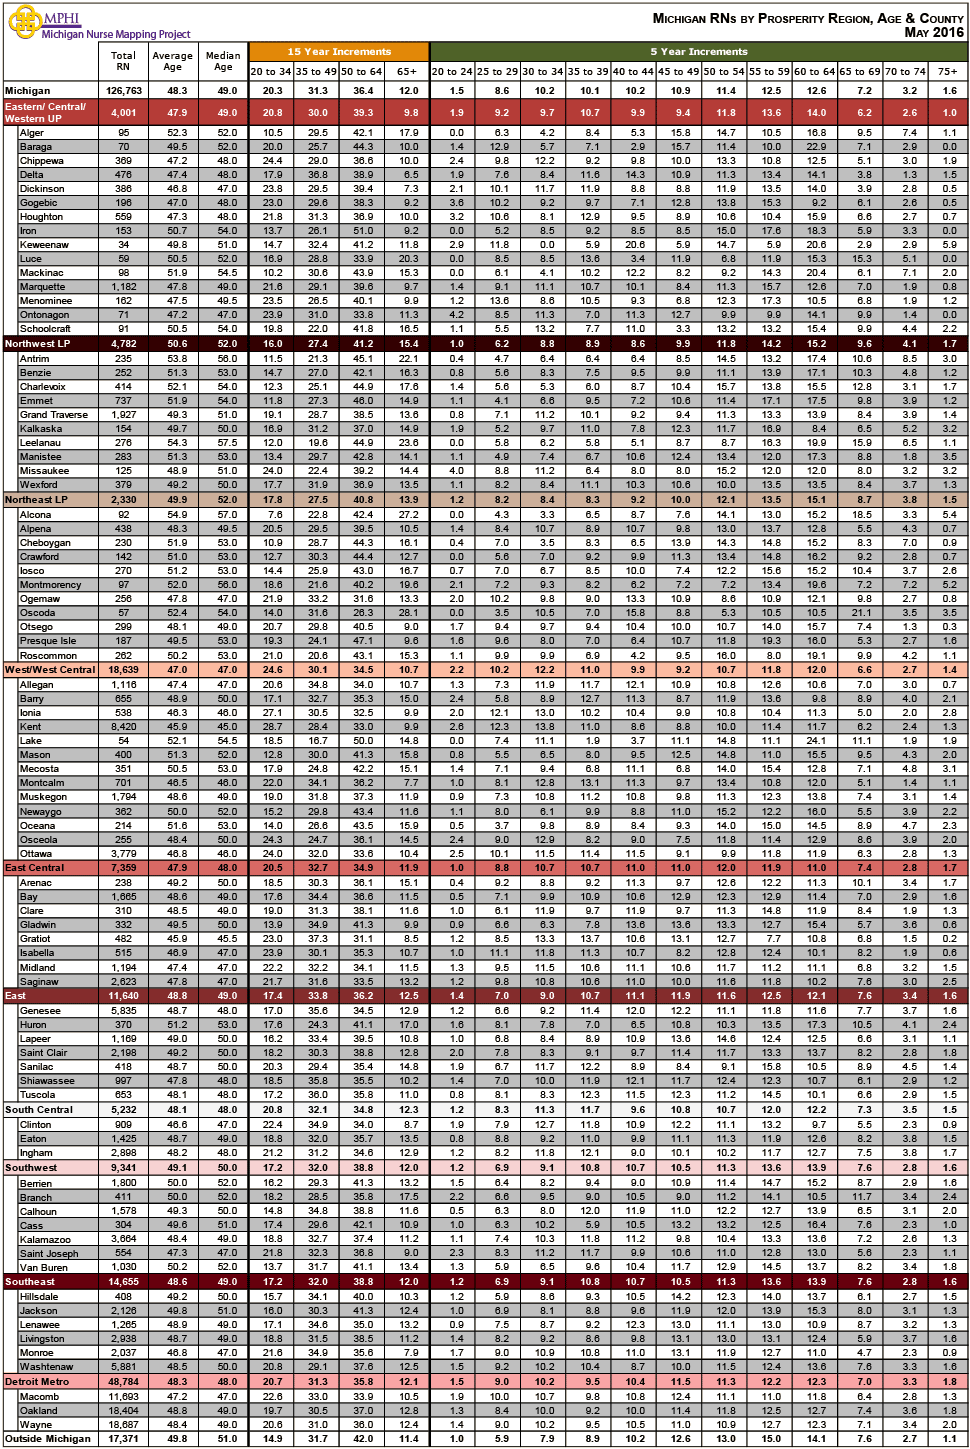 table depicting Michigan's Licensed Registered Nurses by age groups, county and prosperity regions in 2016